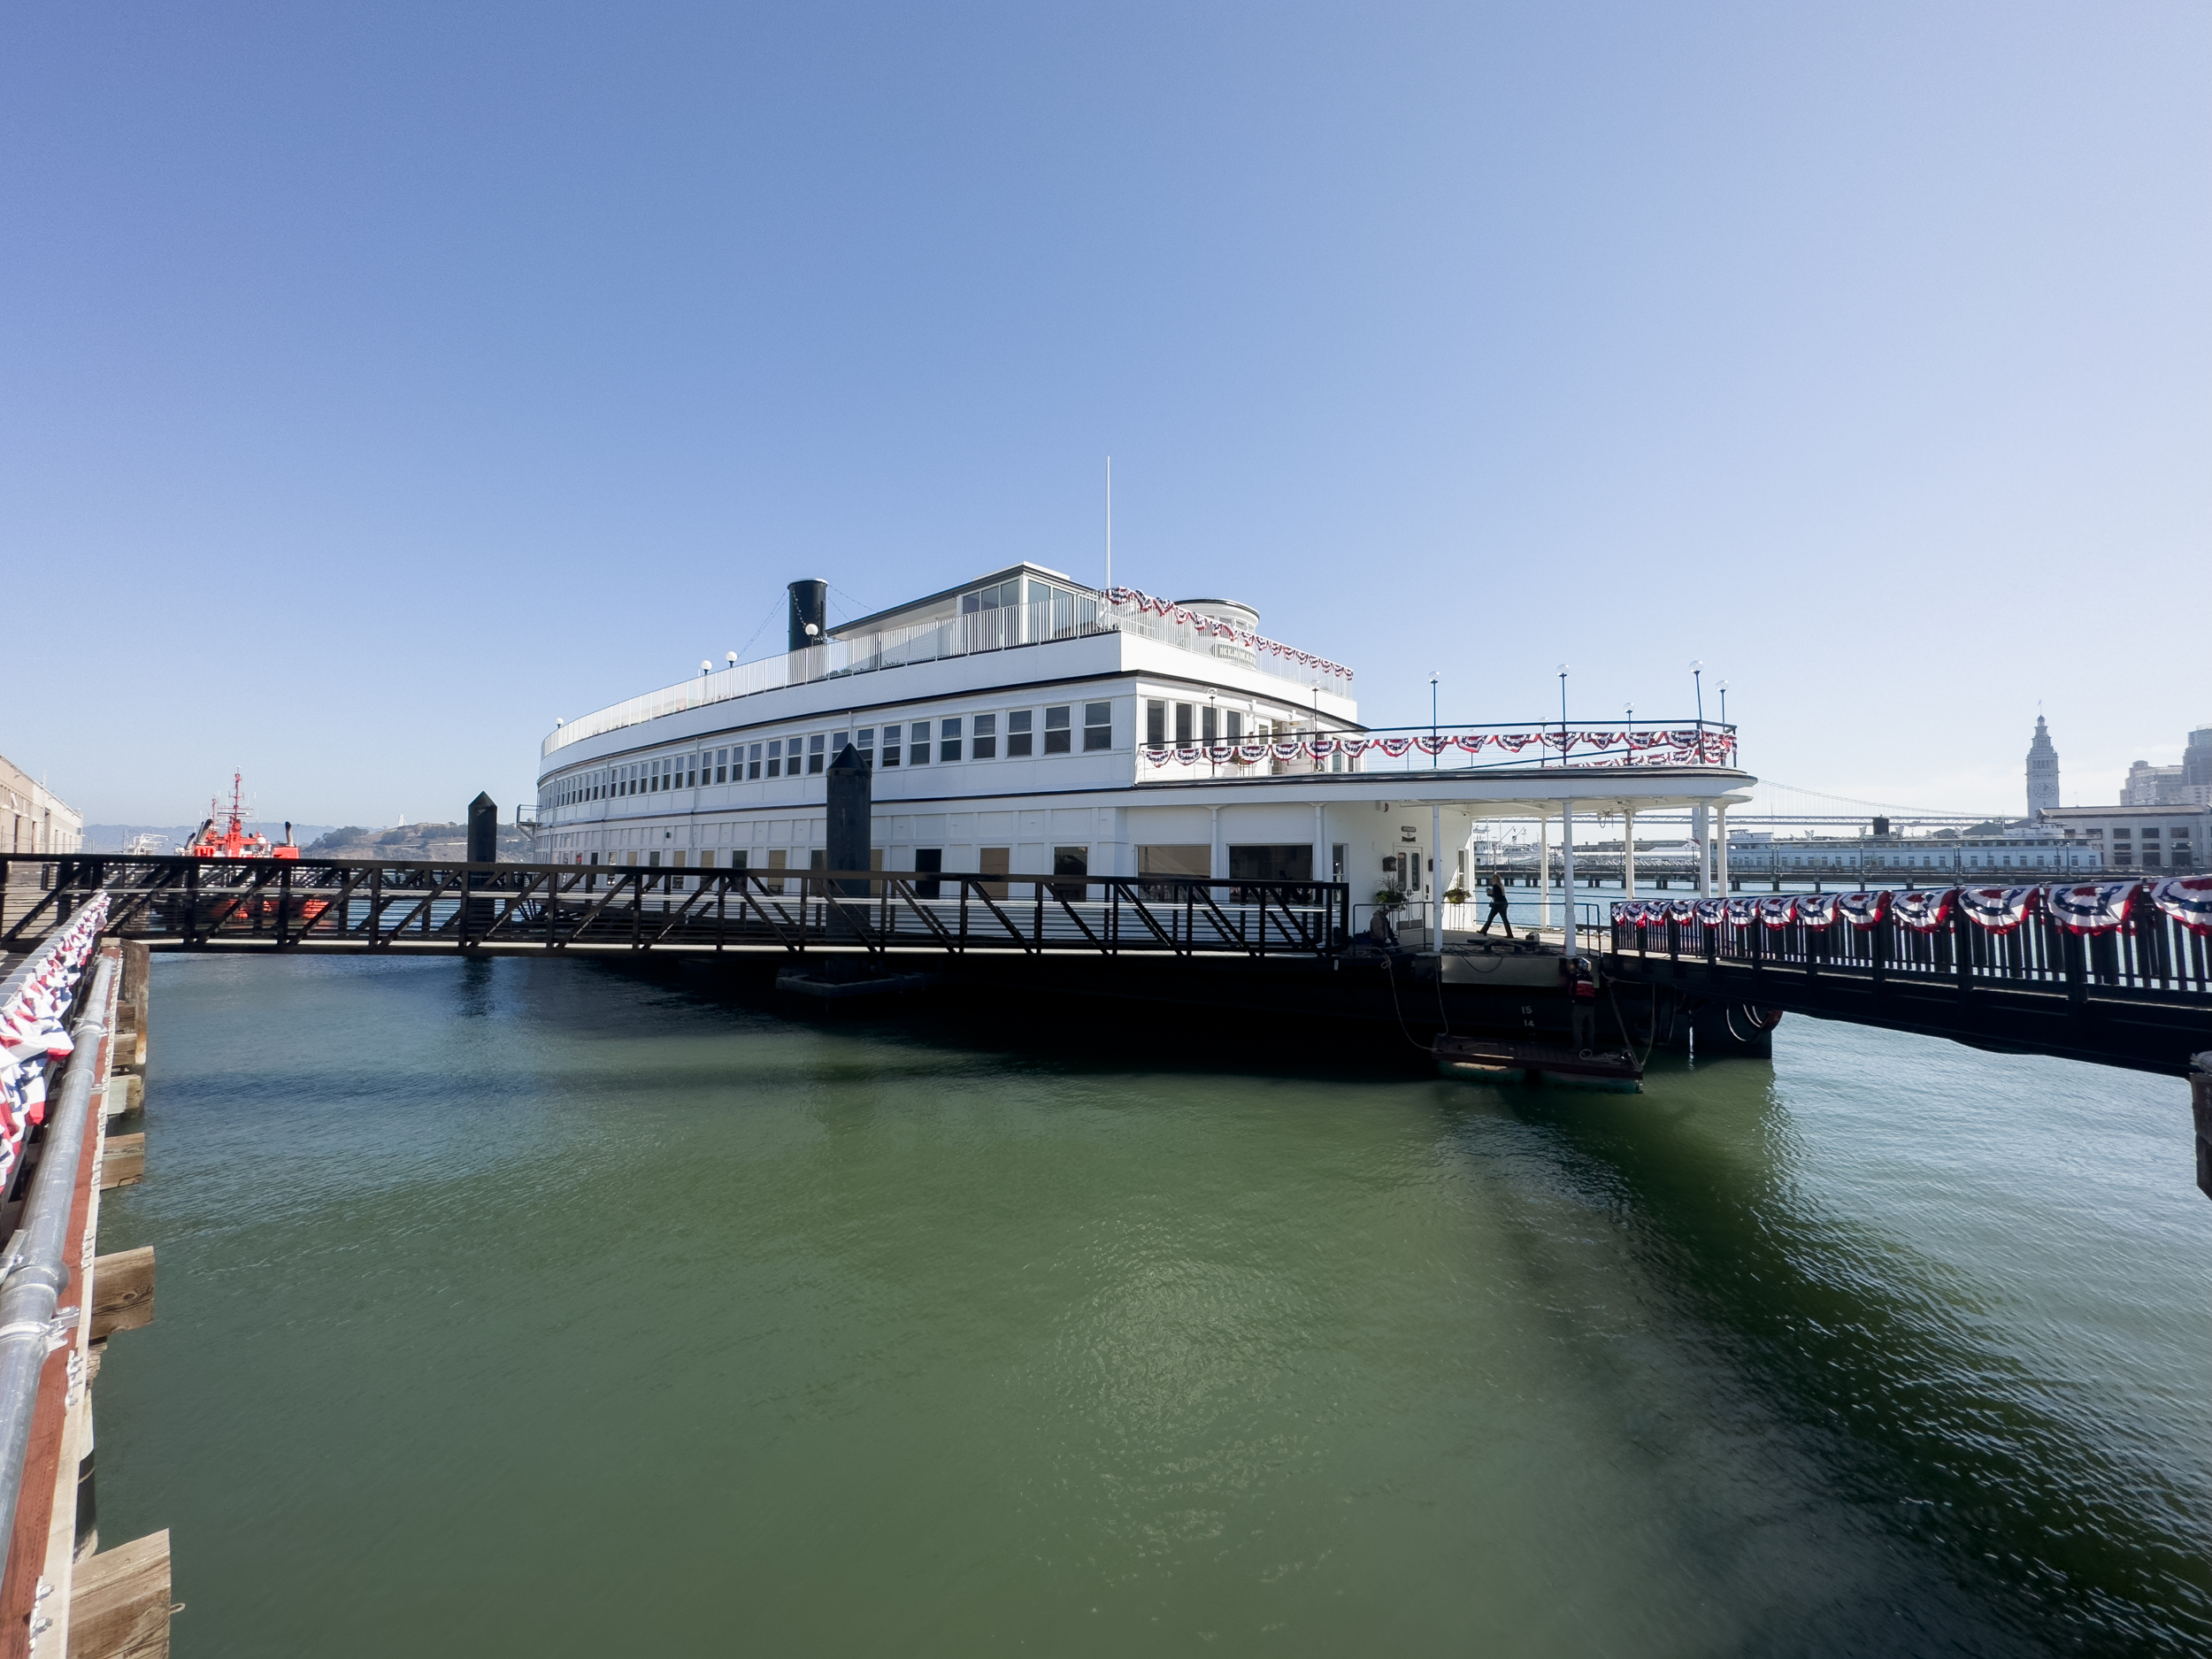 Klamath Ferry Boat seen from Pier 9, image by Andrew Campbell Nelson